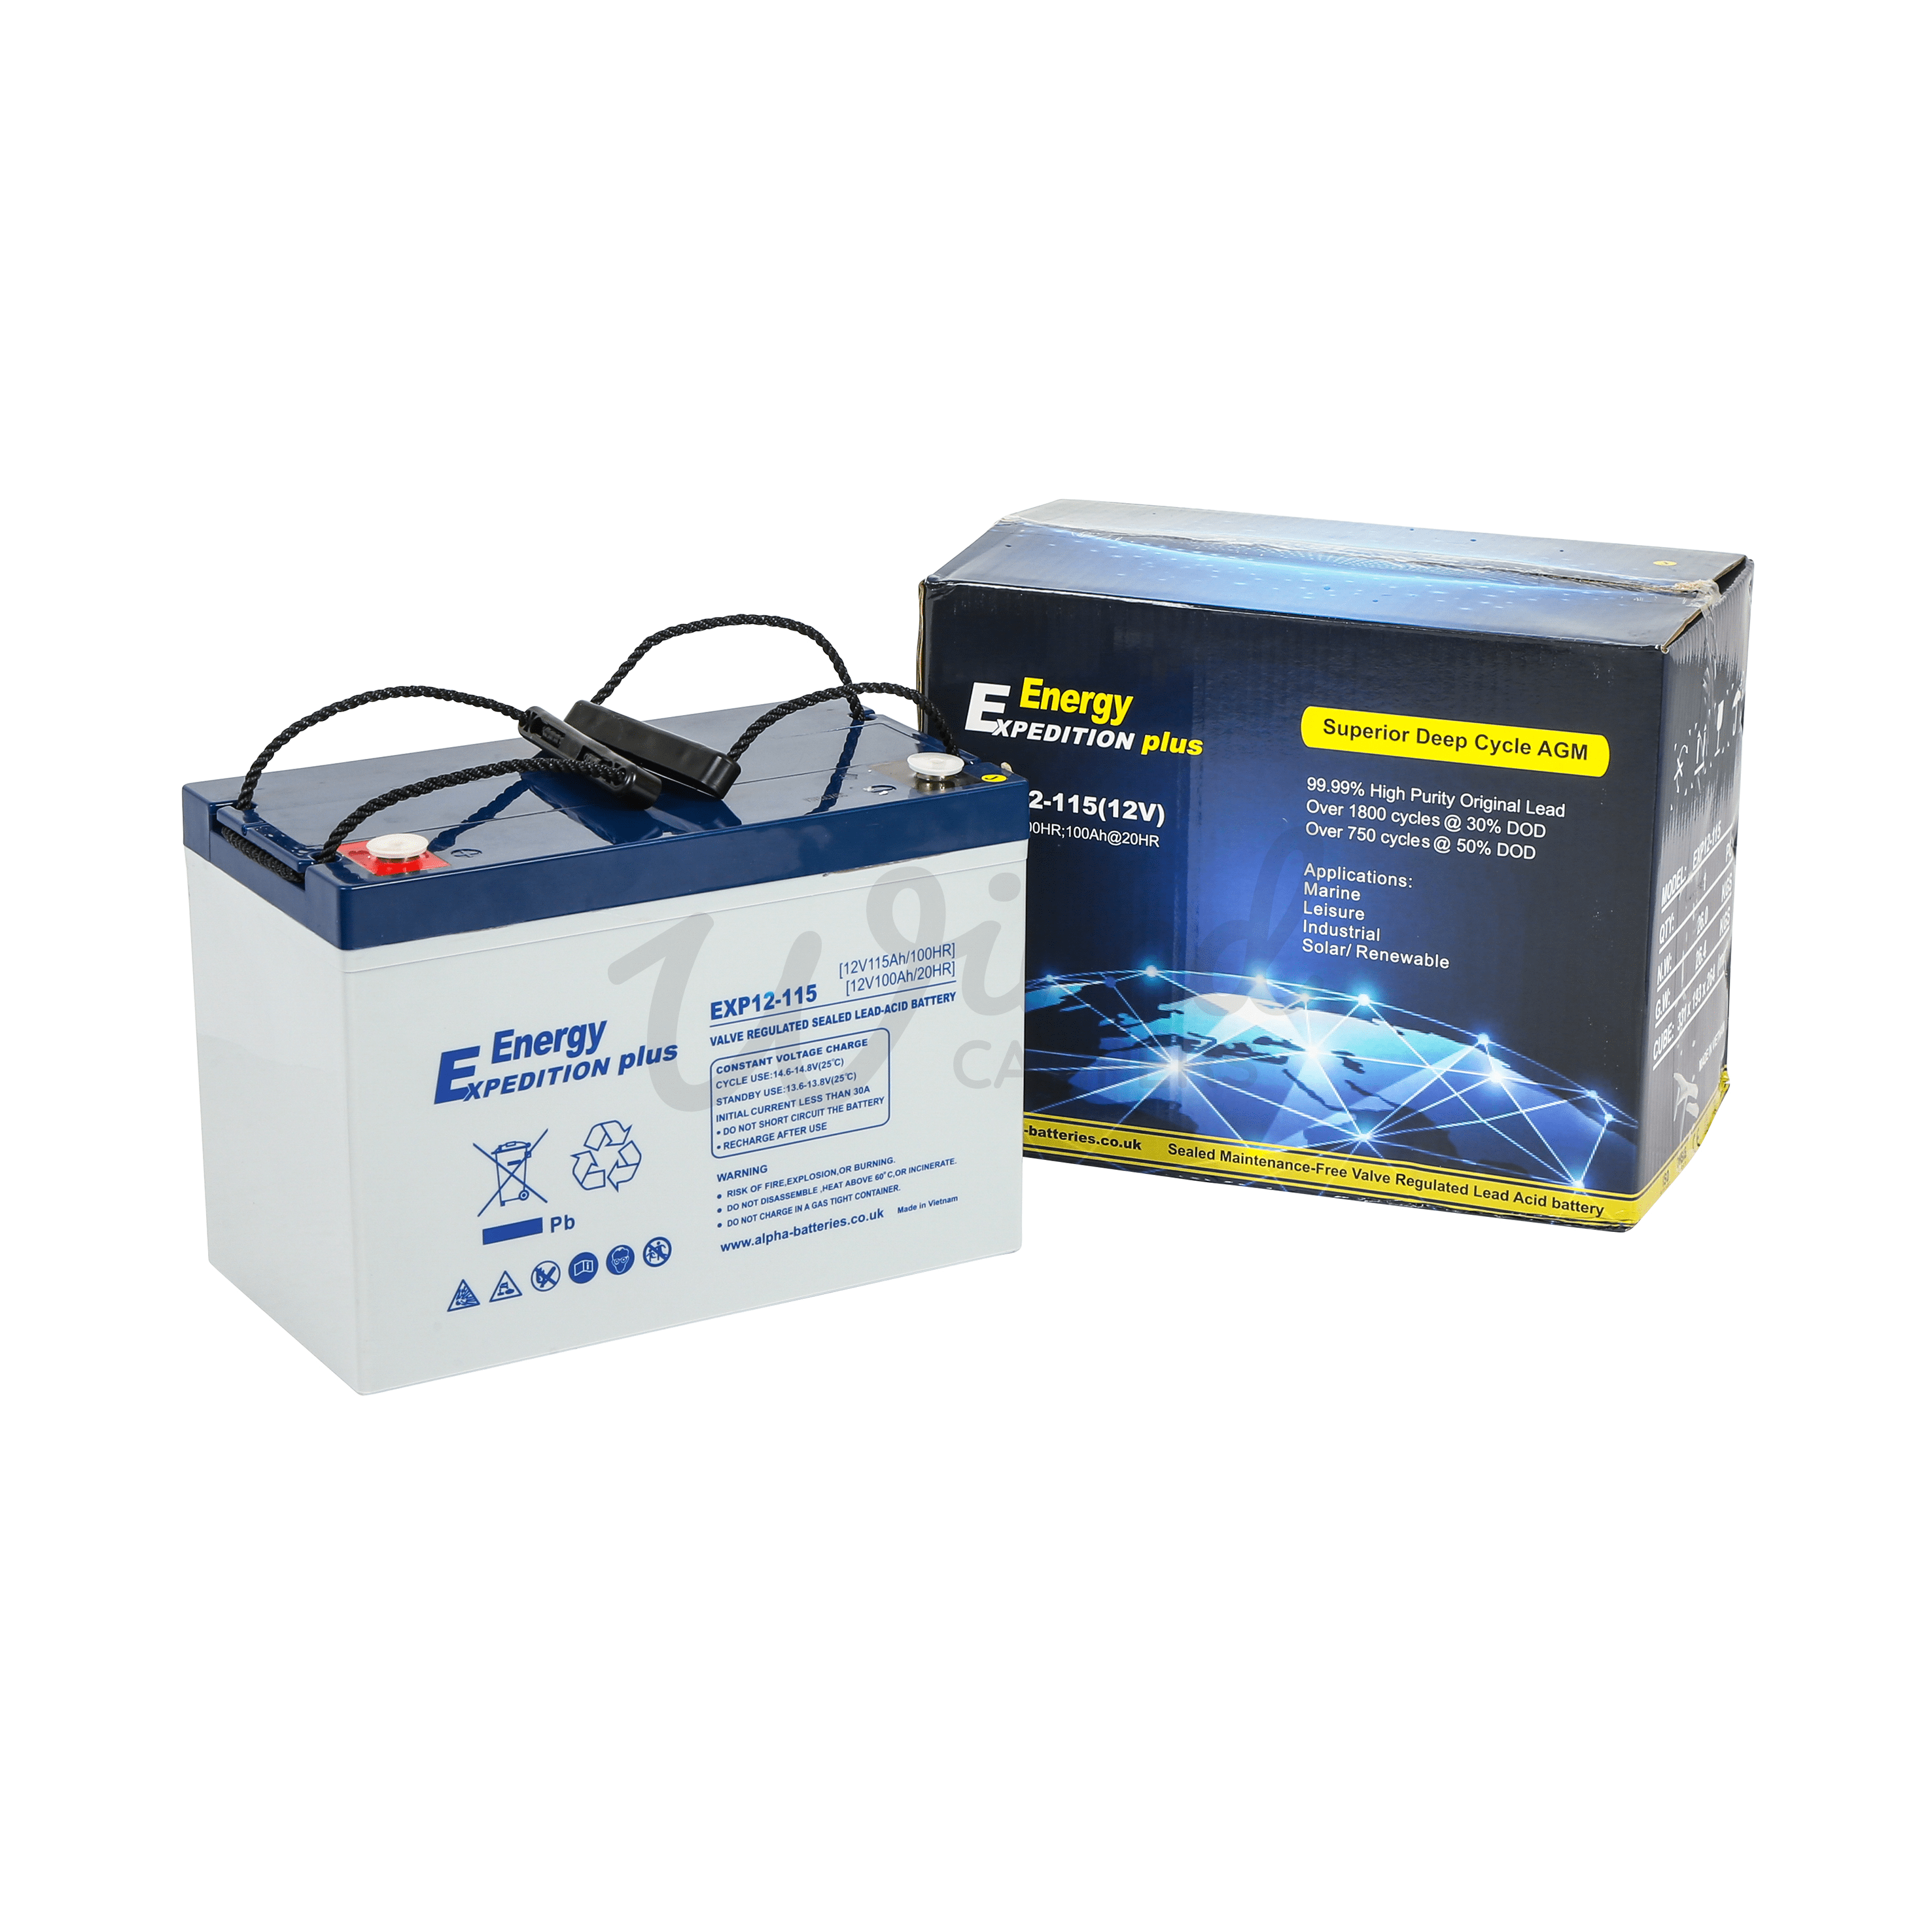 Wired Campers Limited 12v 115AH Expedition Plus AGM Deep Cycle Leisure Battery (EXP12-115)